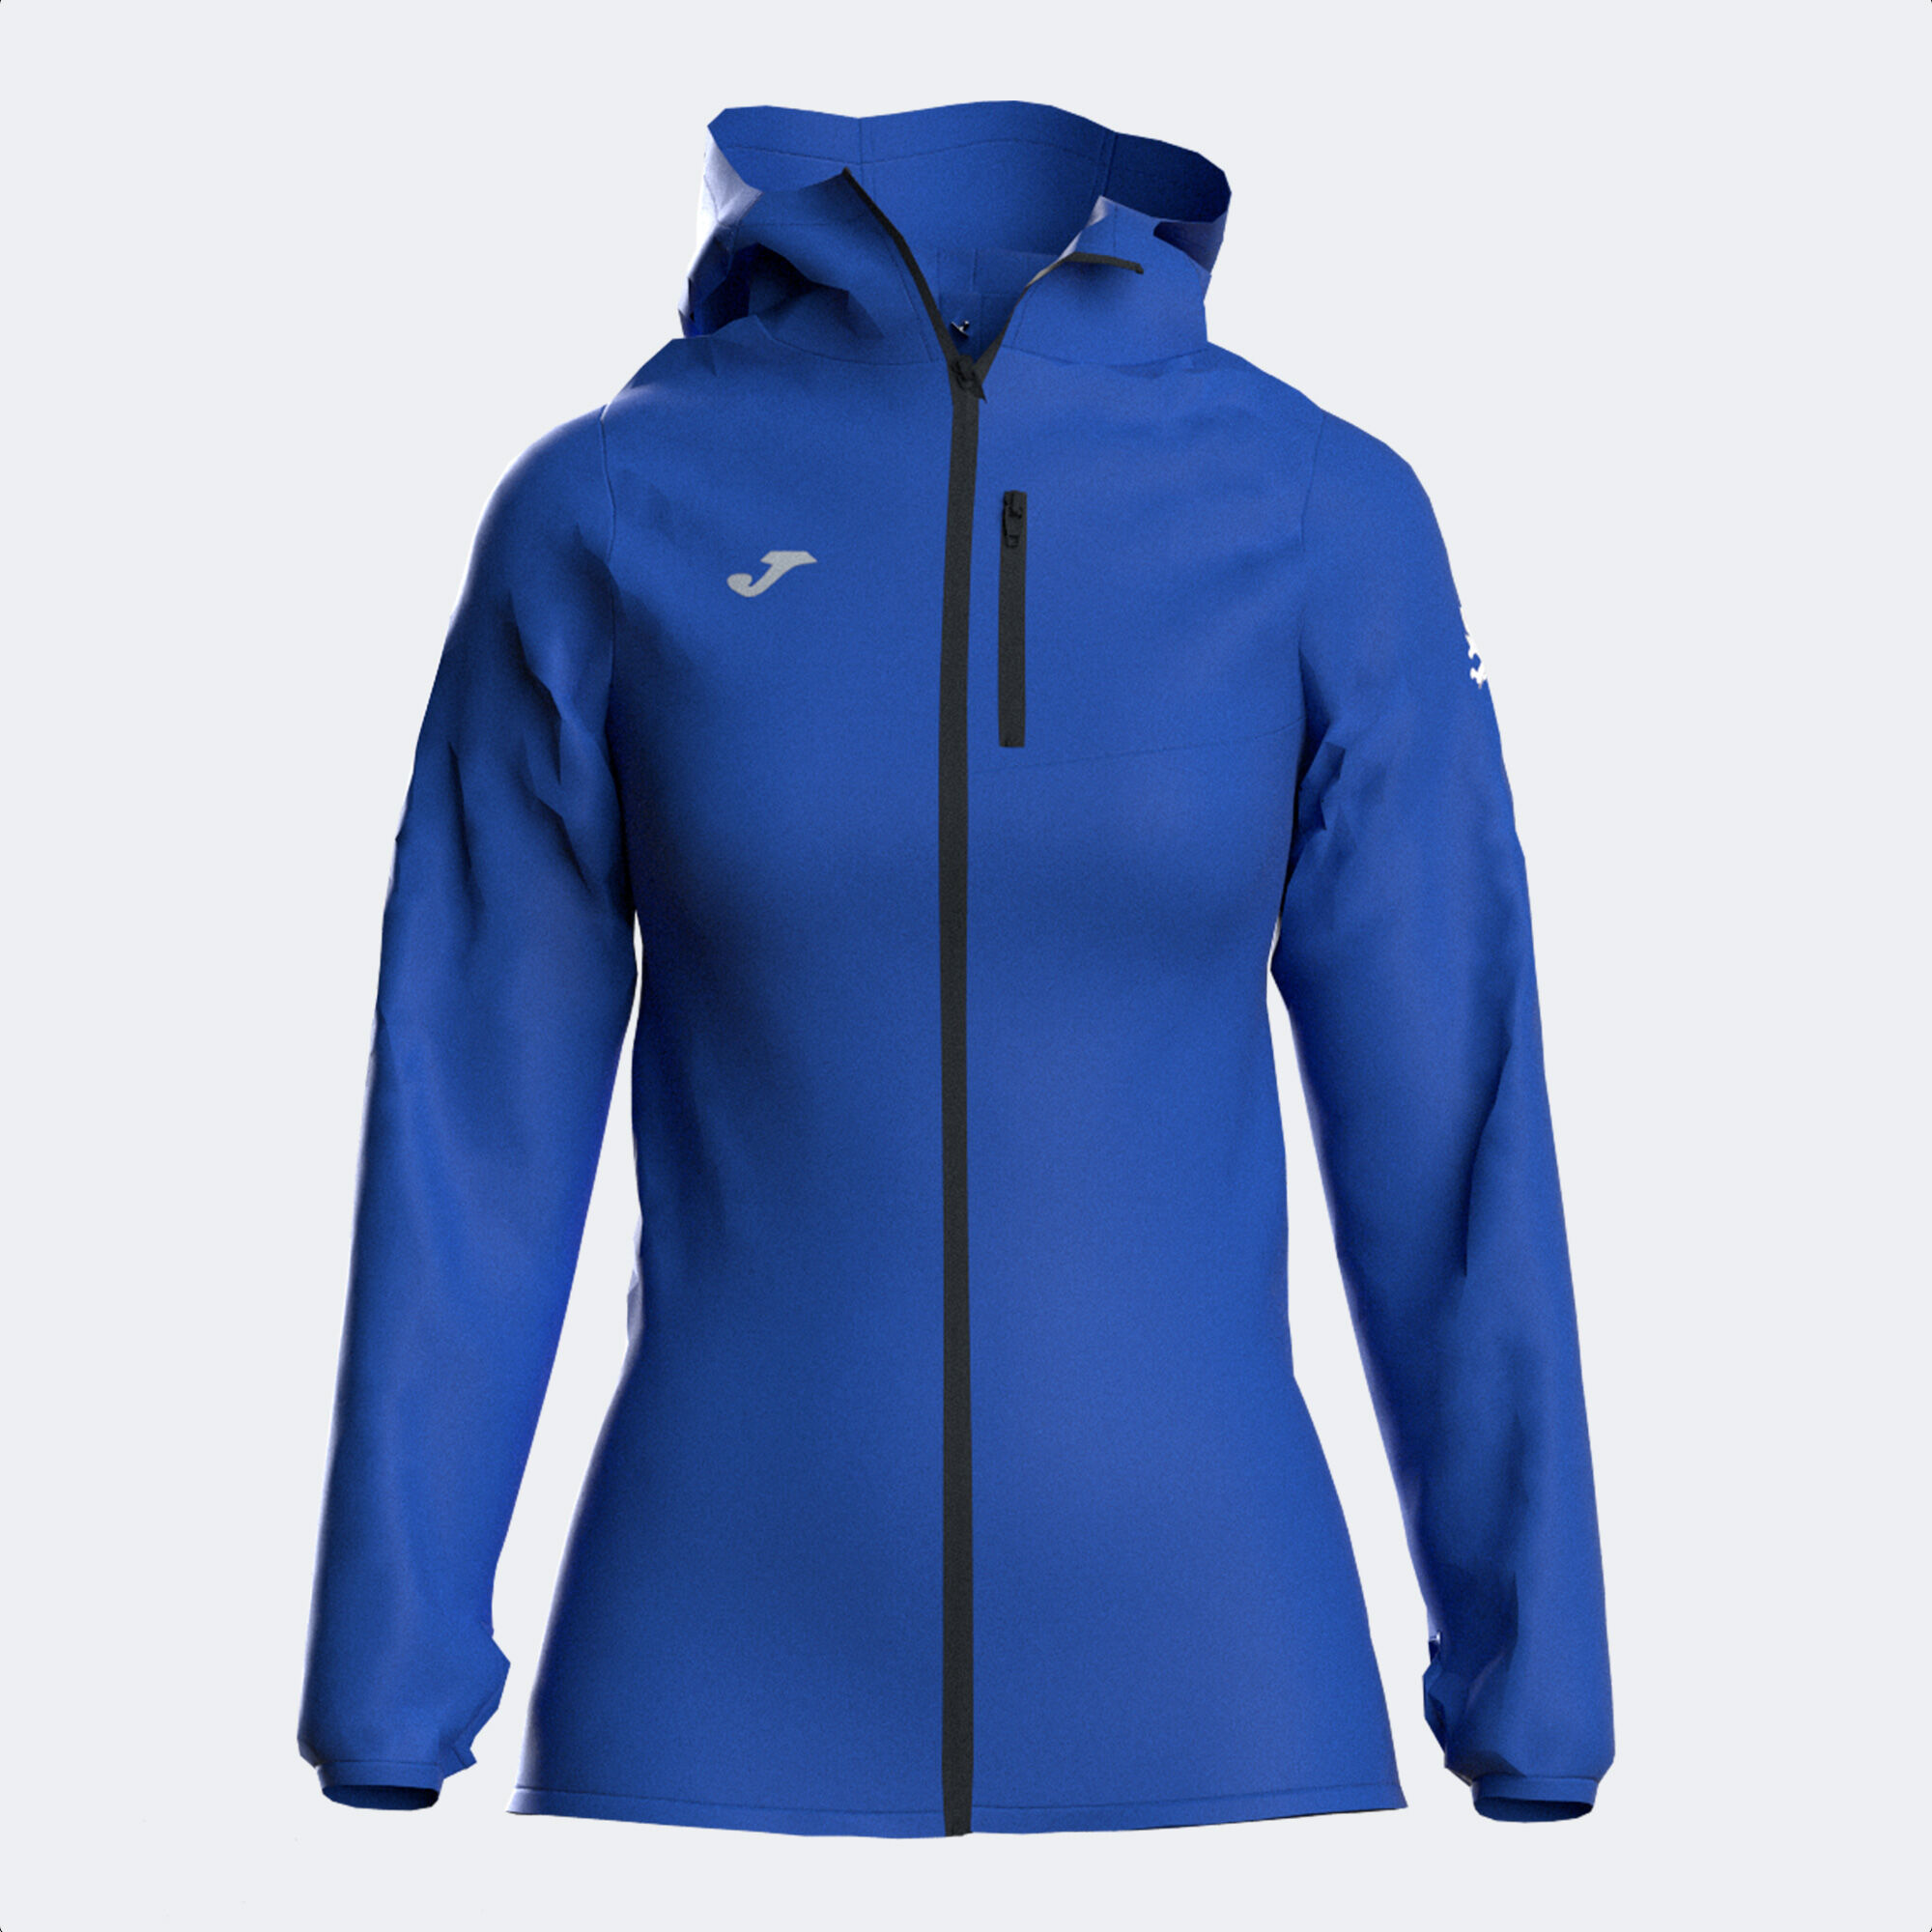 Giacca a vento donna R-Trail Nature blu reale